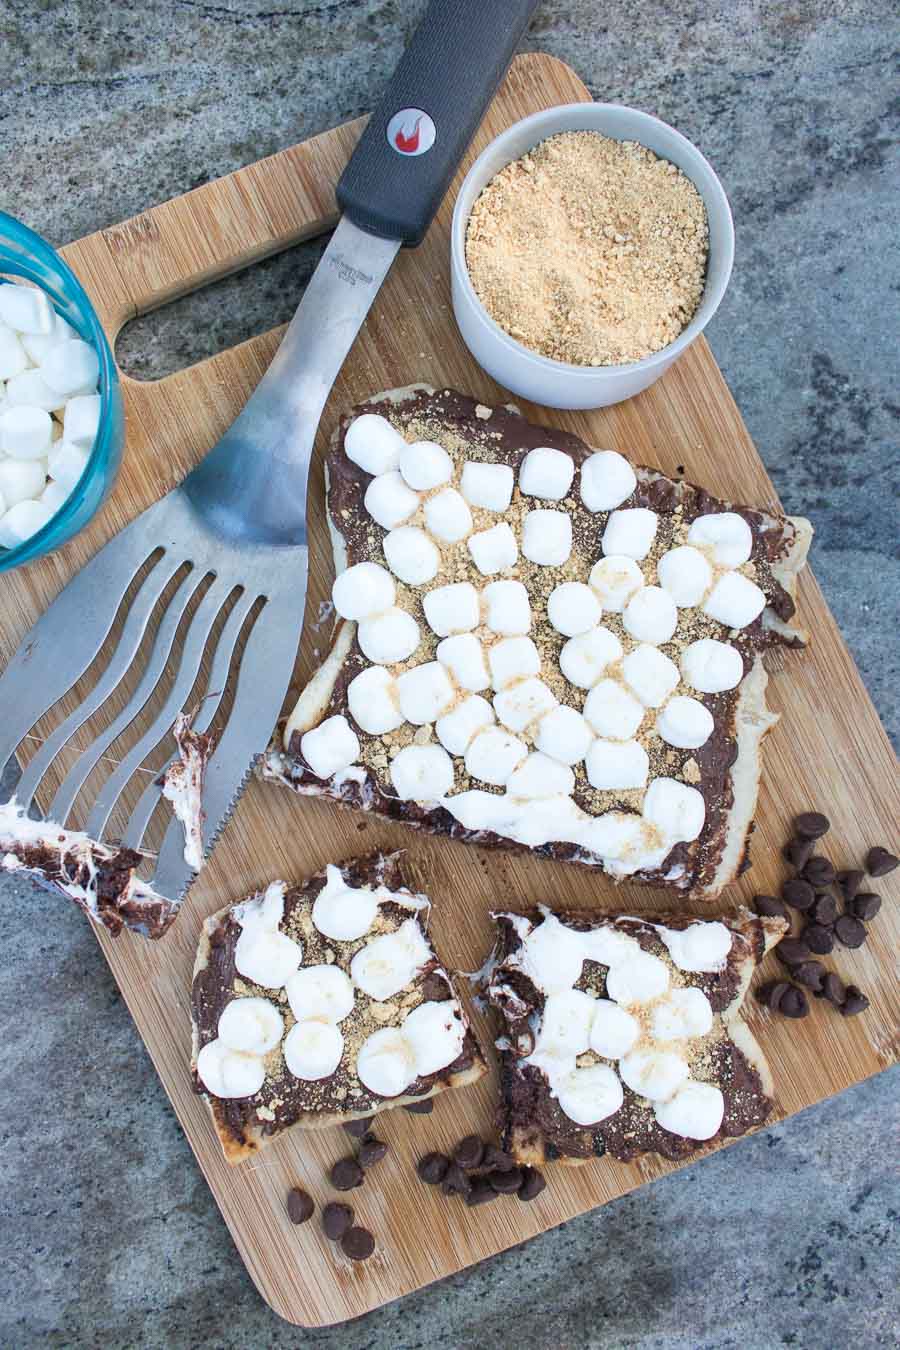 You're 5 ingredients and 15 minutes away from your new favorite dessert recipe. This Grilled S'mores Pizza is a fun twist on a classic dessert that's perfect for outdoor entertaining or an after-dinner dessert.